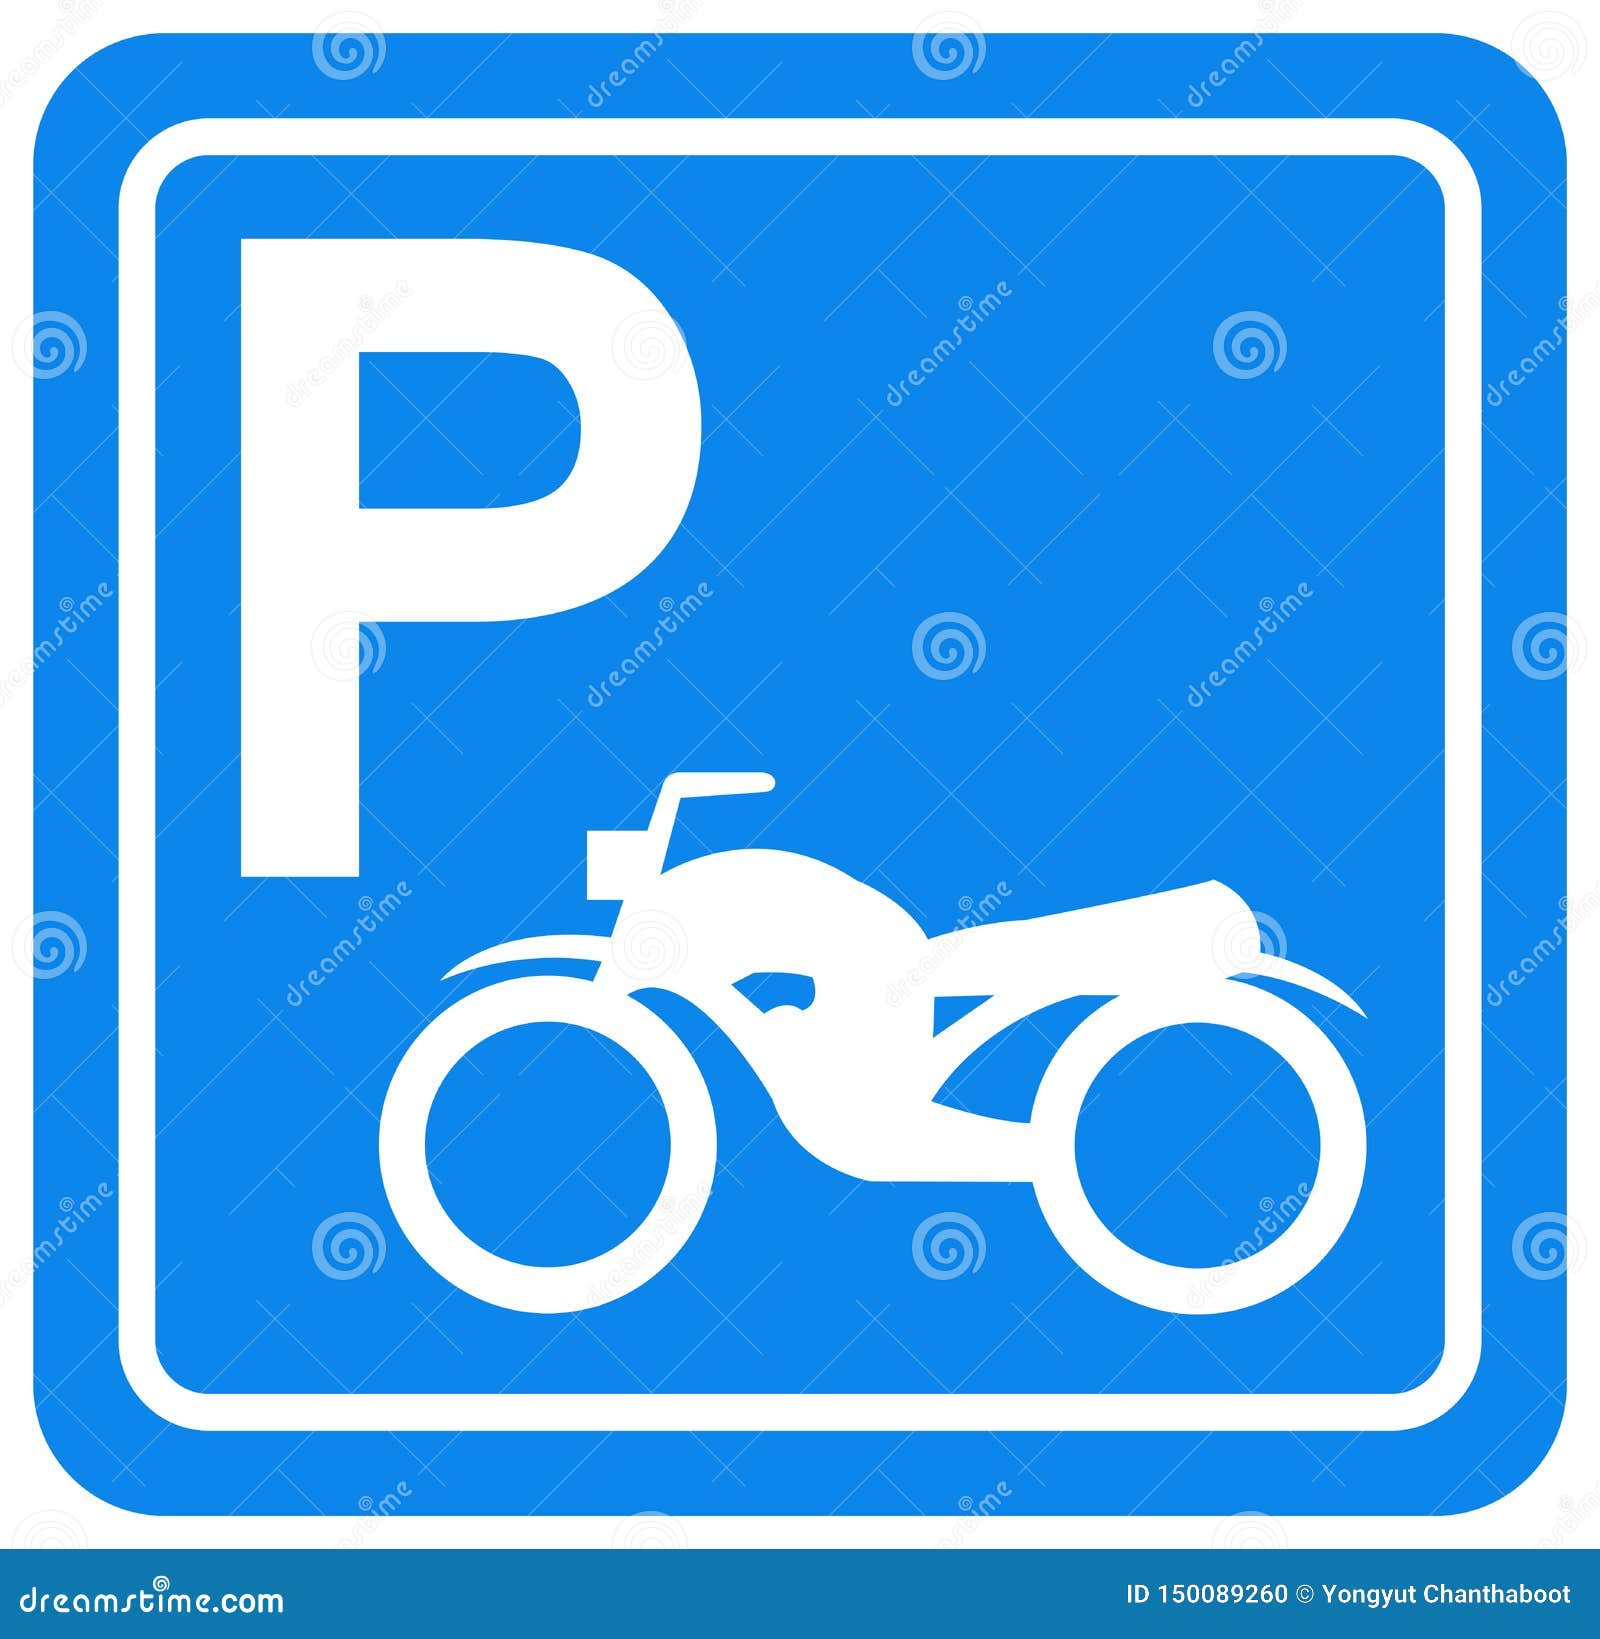 No Bicycles Allowed Sign Png Image - No Bicycle Parking Sign Transparent  PNG - 1892x1840 - Free Download on NicePNG